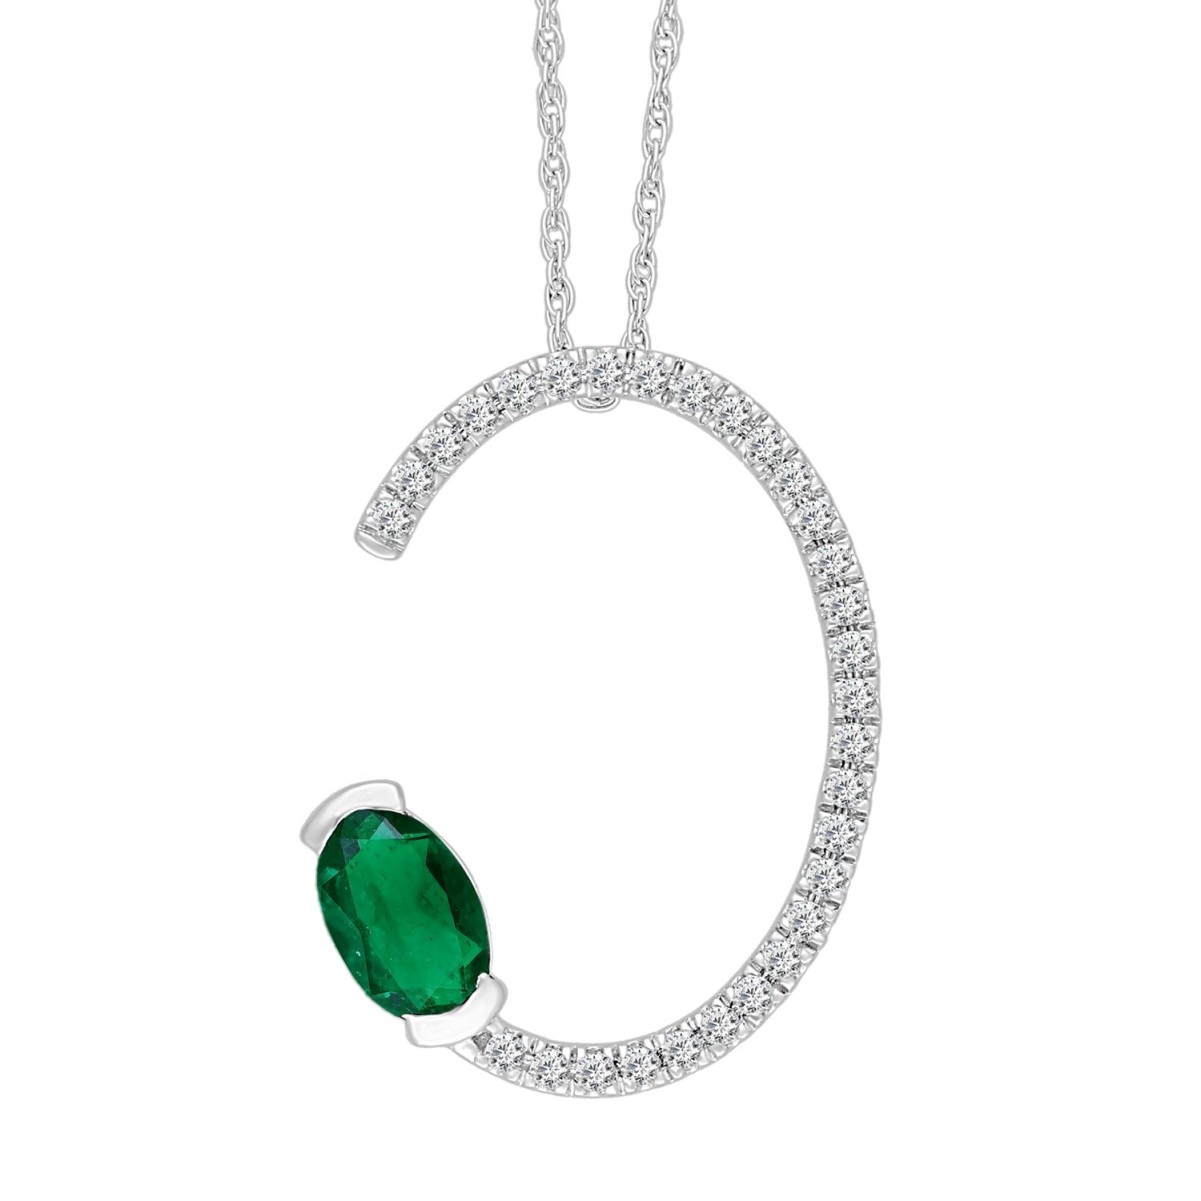 18K WHITE GOLD 5/8CT ROUND/OVAL DIAMOND LADIES PENDANT WITH CHAIN(COLOR STONE OVAL GREEN EMERALD DIAMOND 1/2CT)